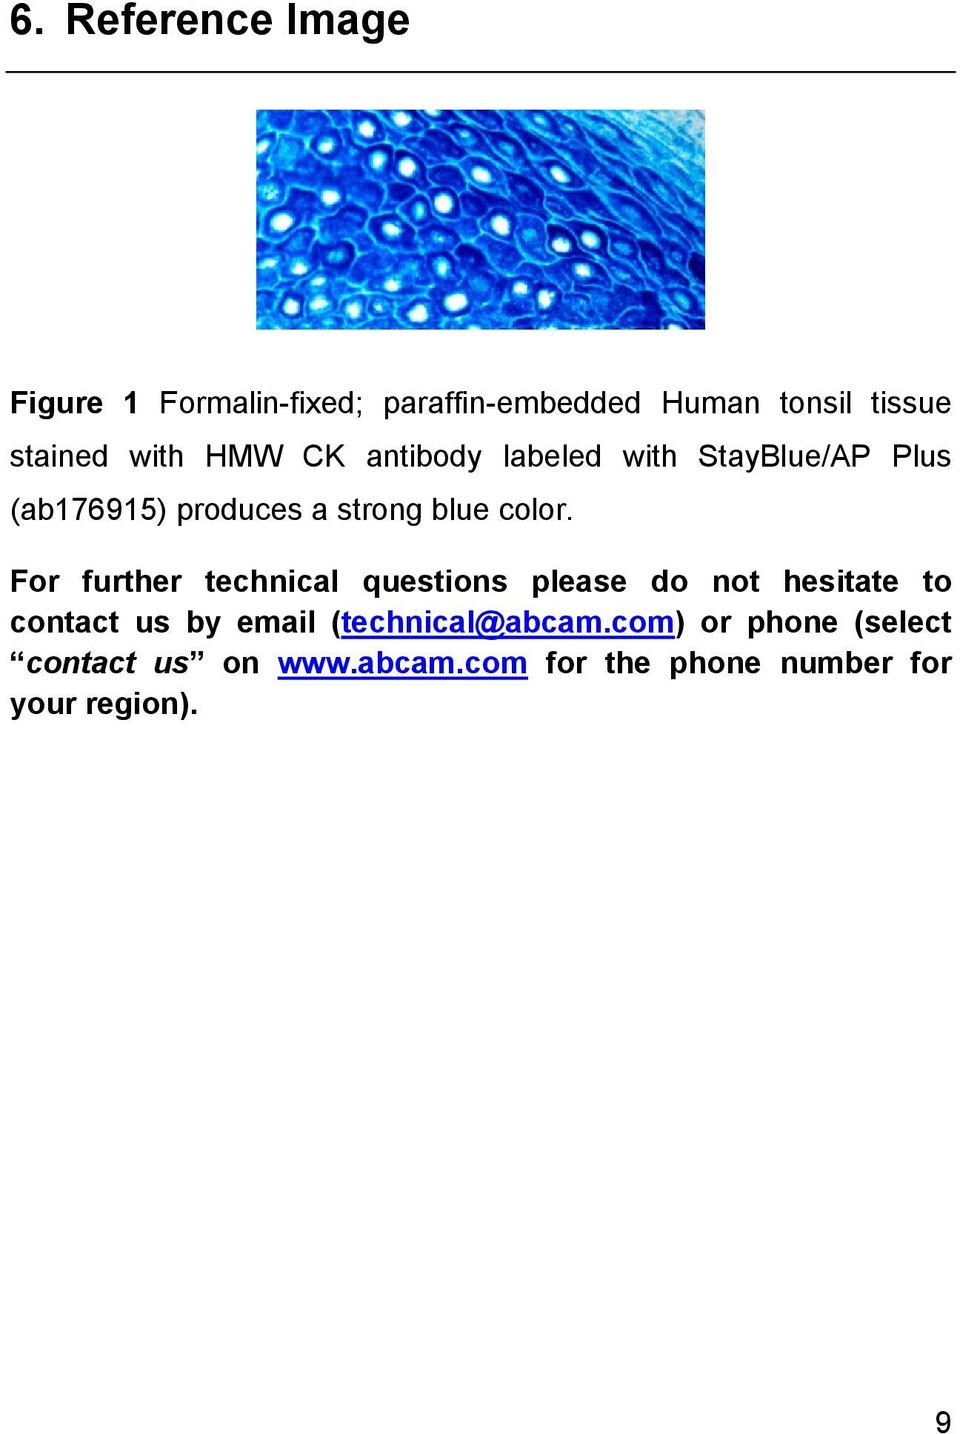 For further technical questions please do not hesitate to contact us by email